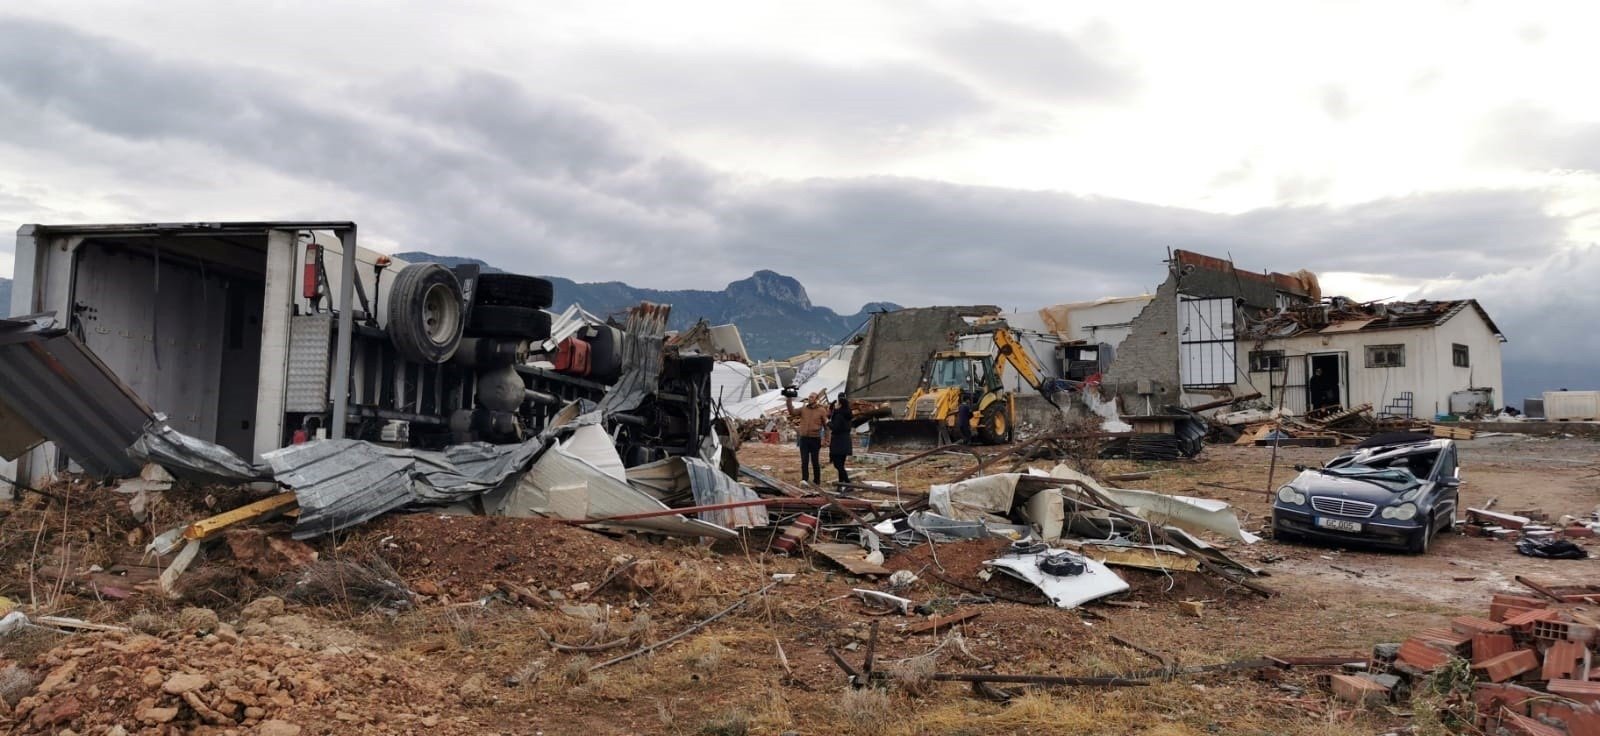 Damaged buildings and vehicles are seen in the aftermath of a tornado, in the Girne district, the Turkish Republic of Northern Cyprus (TRNC), Nov. 21, 2020. (IHA Photo)